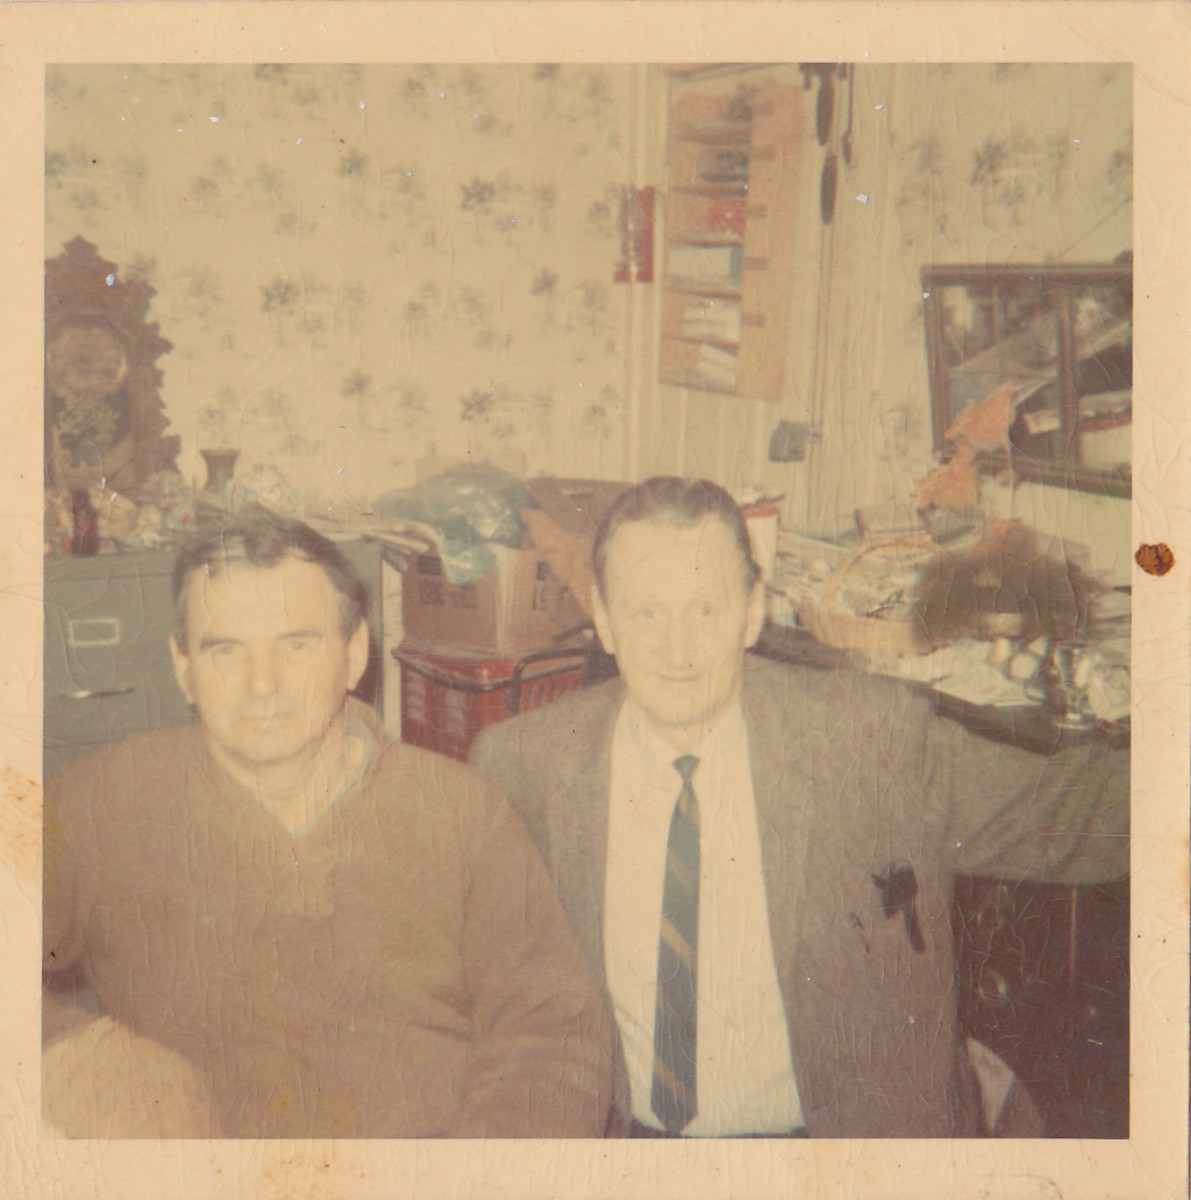 My father is on the left and uncle Augie on the right.  Taken in 1971